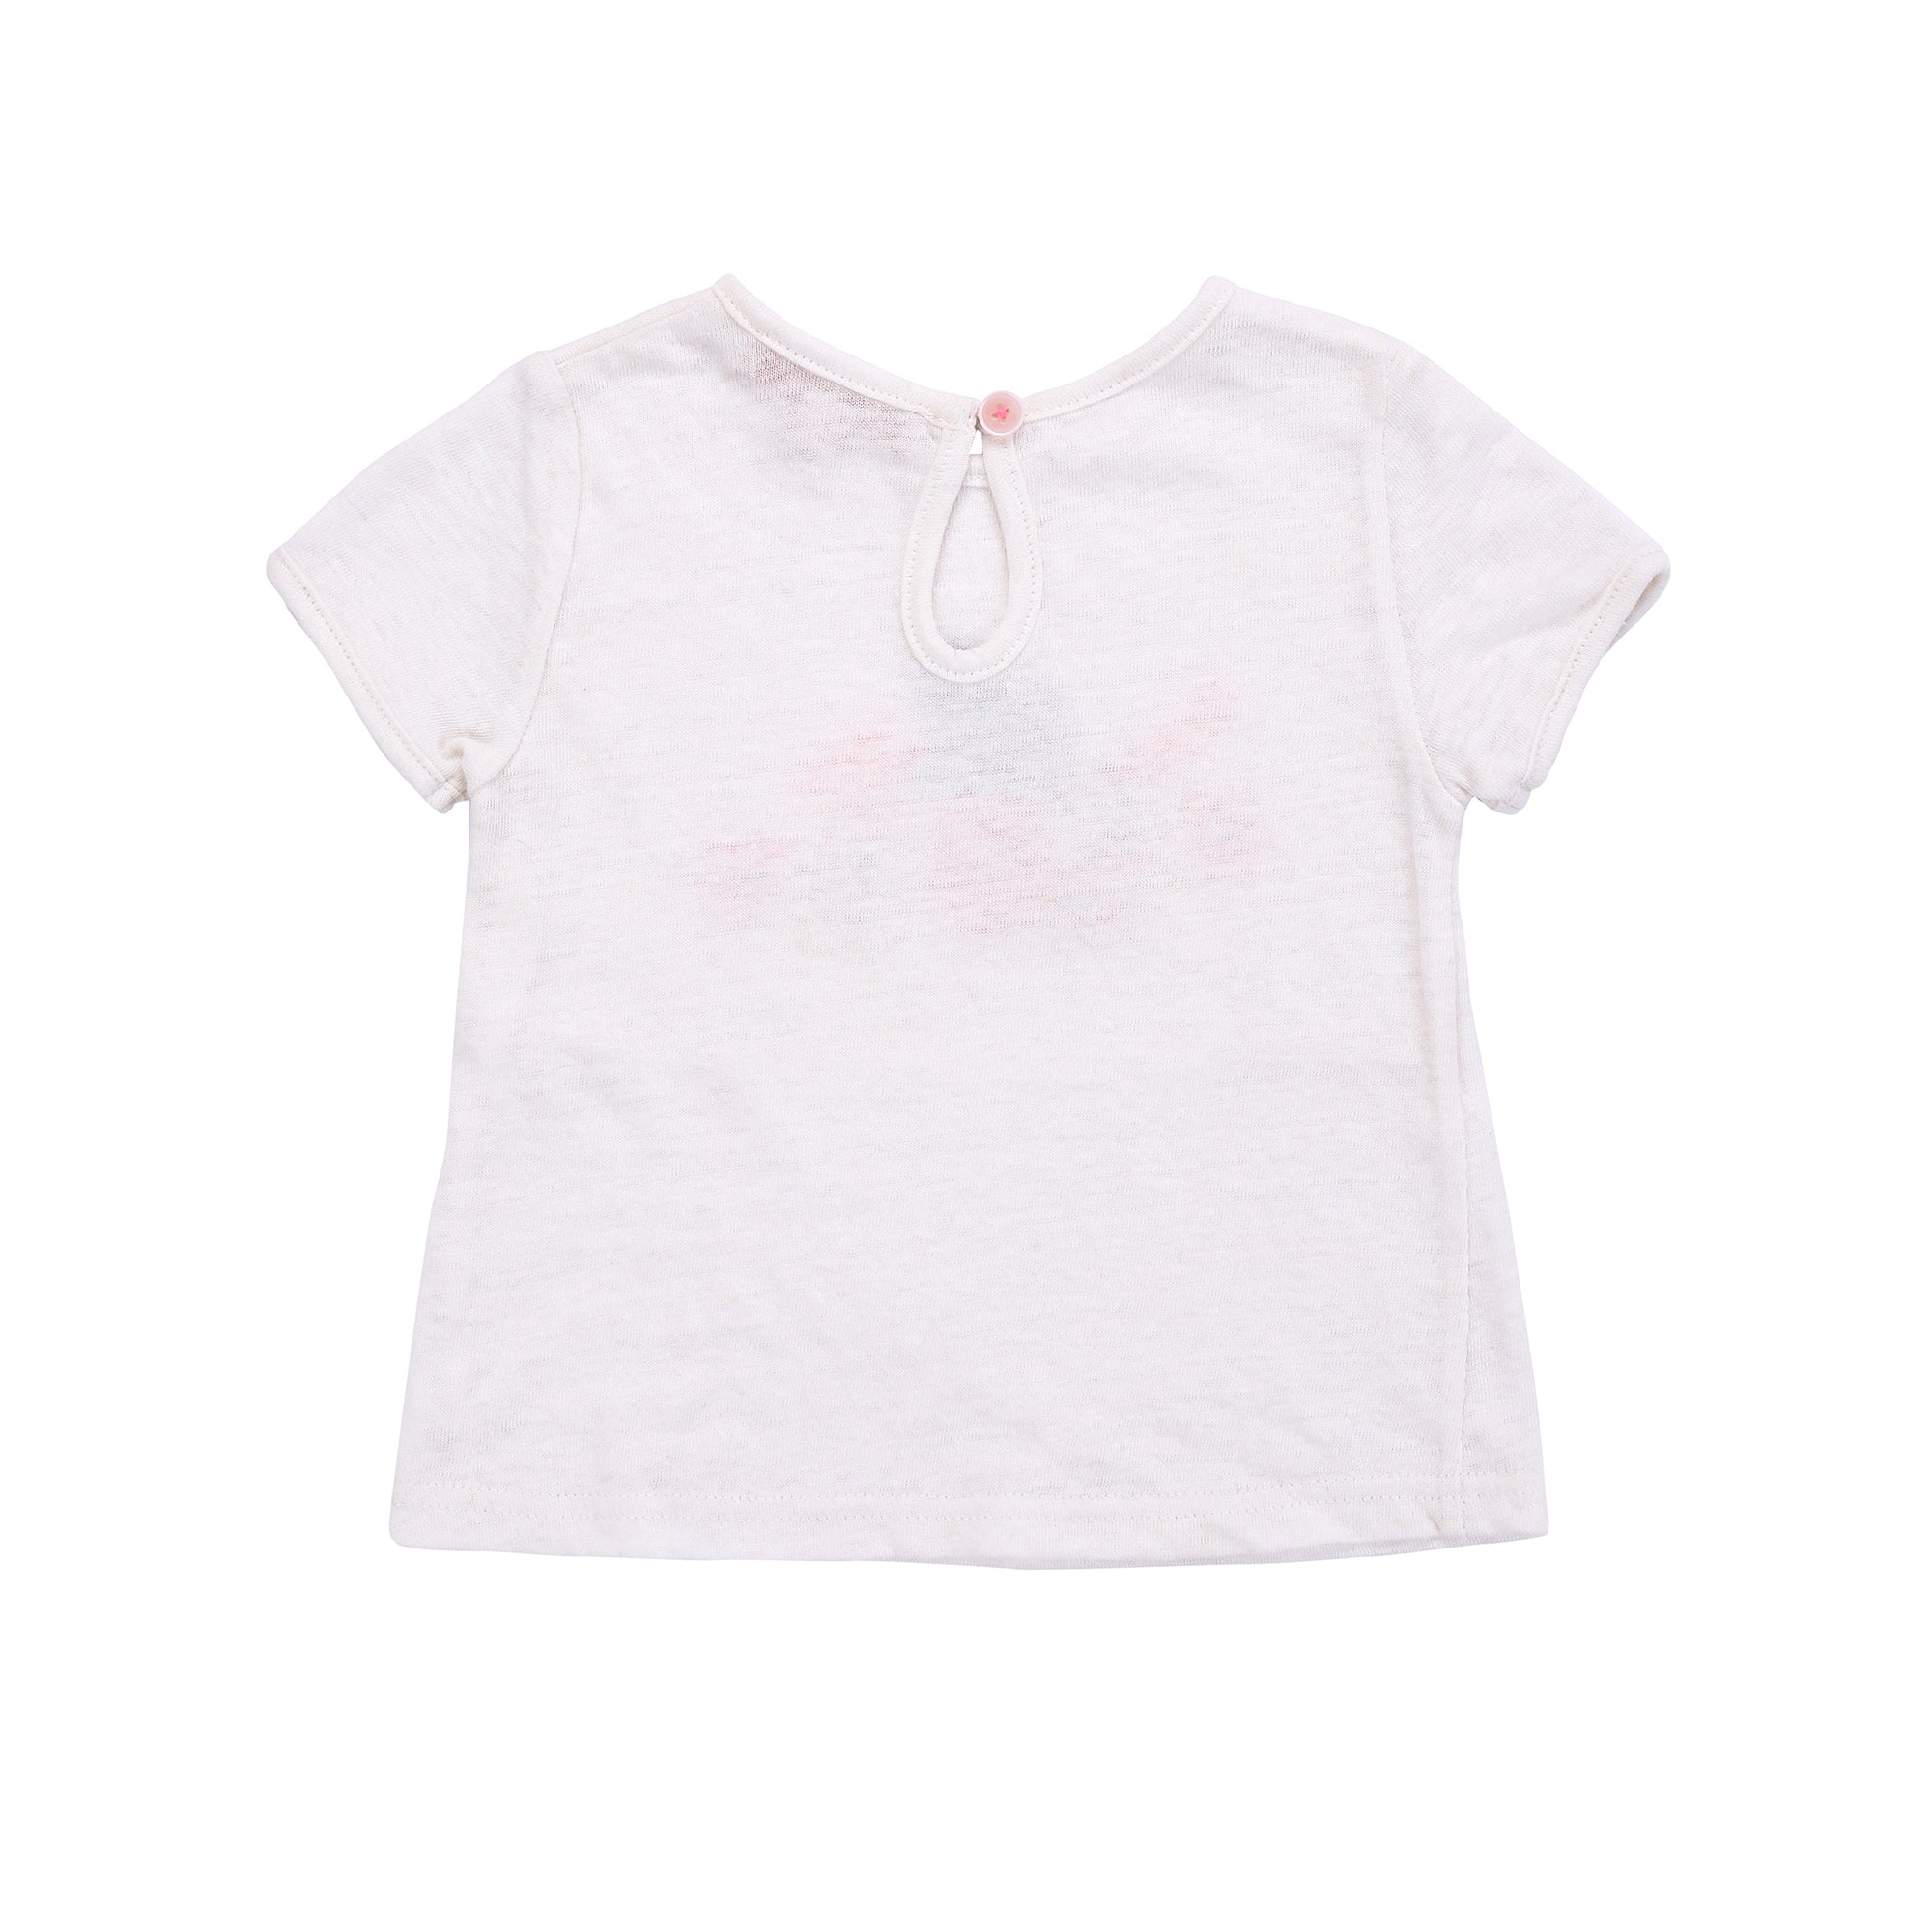 Girls White Embroidered T-shirt